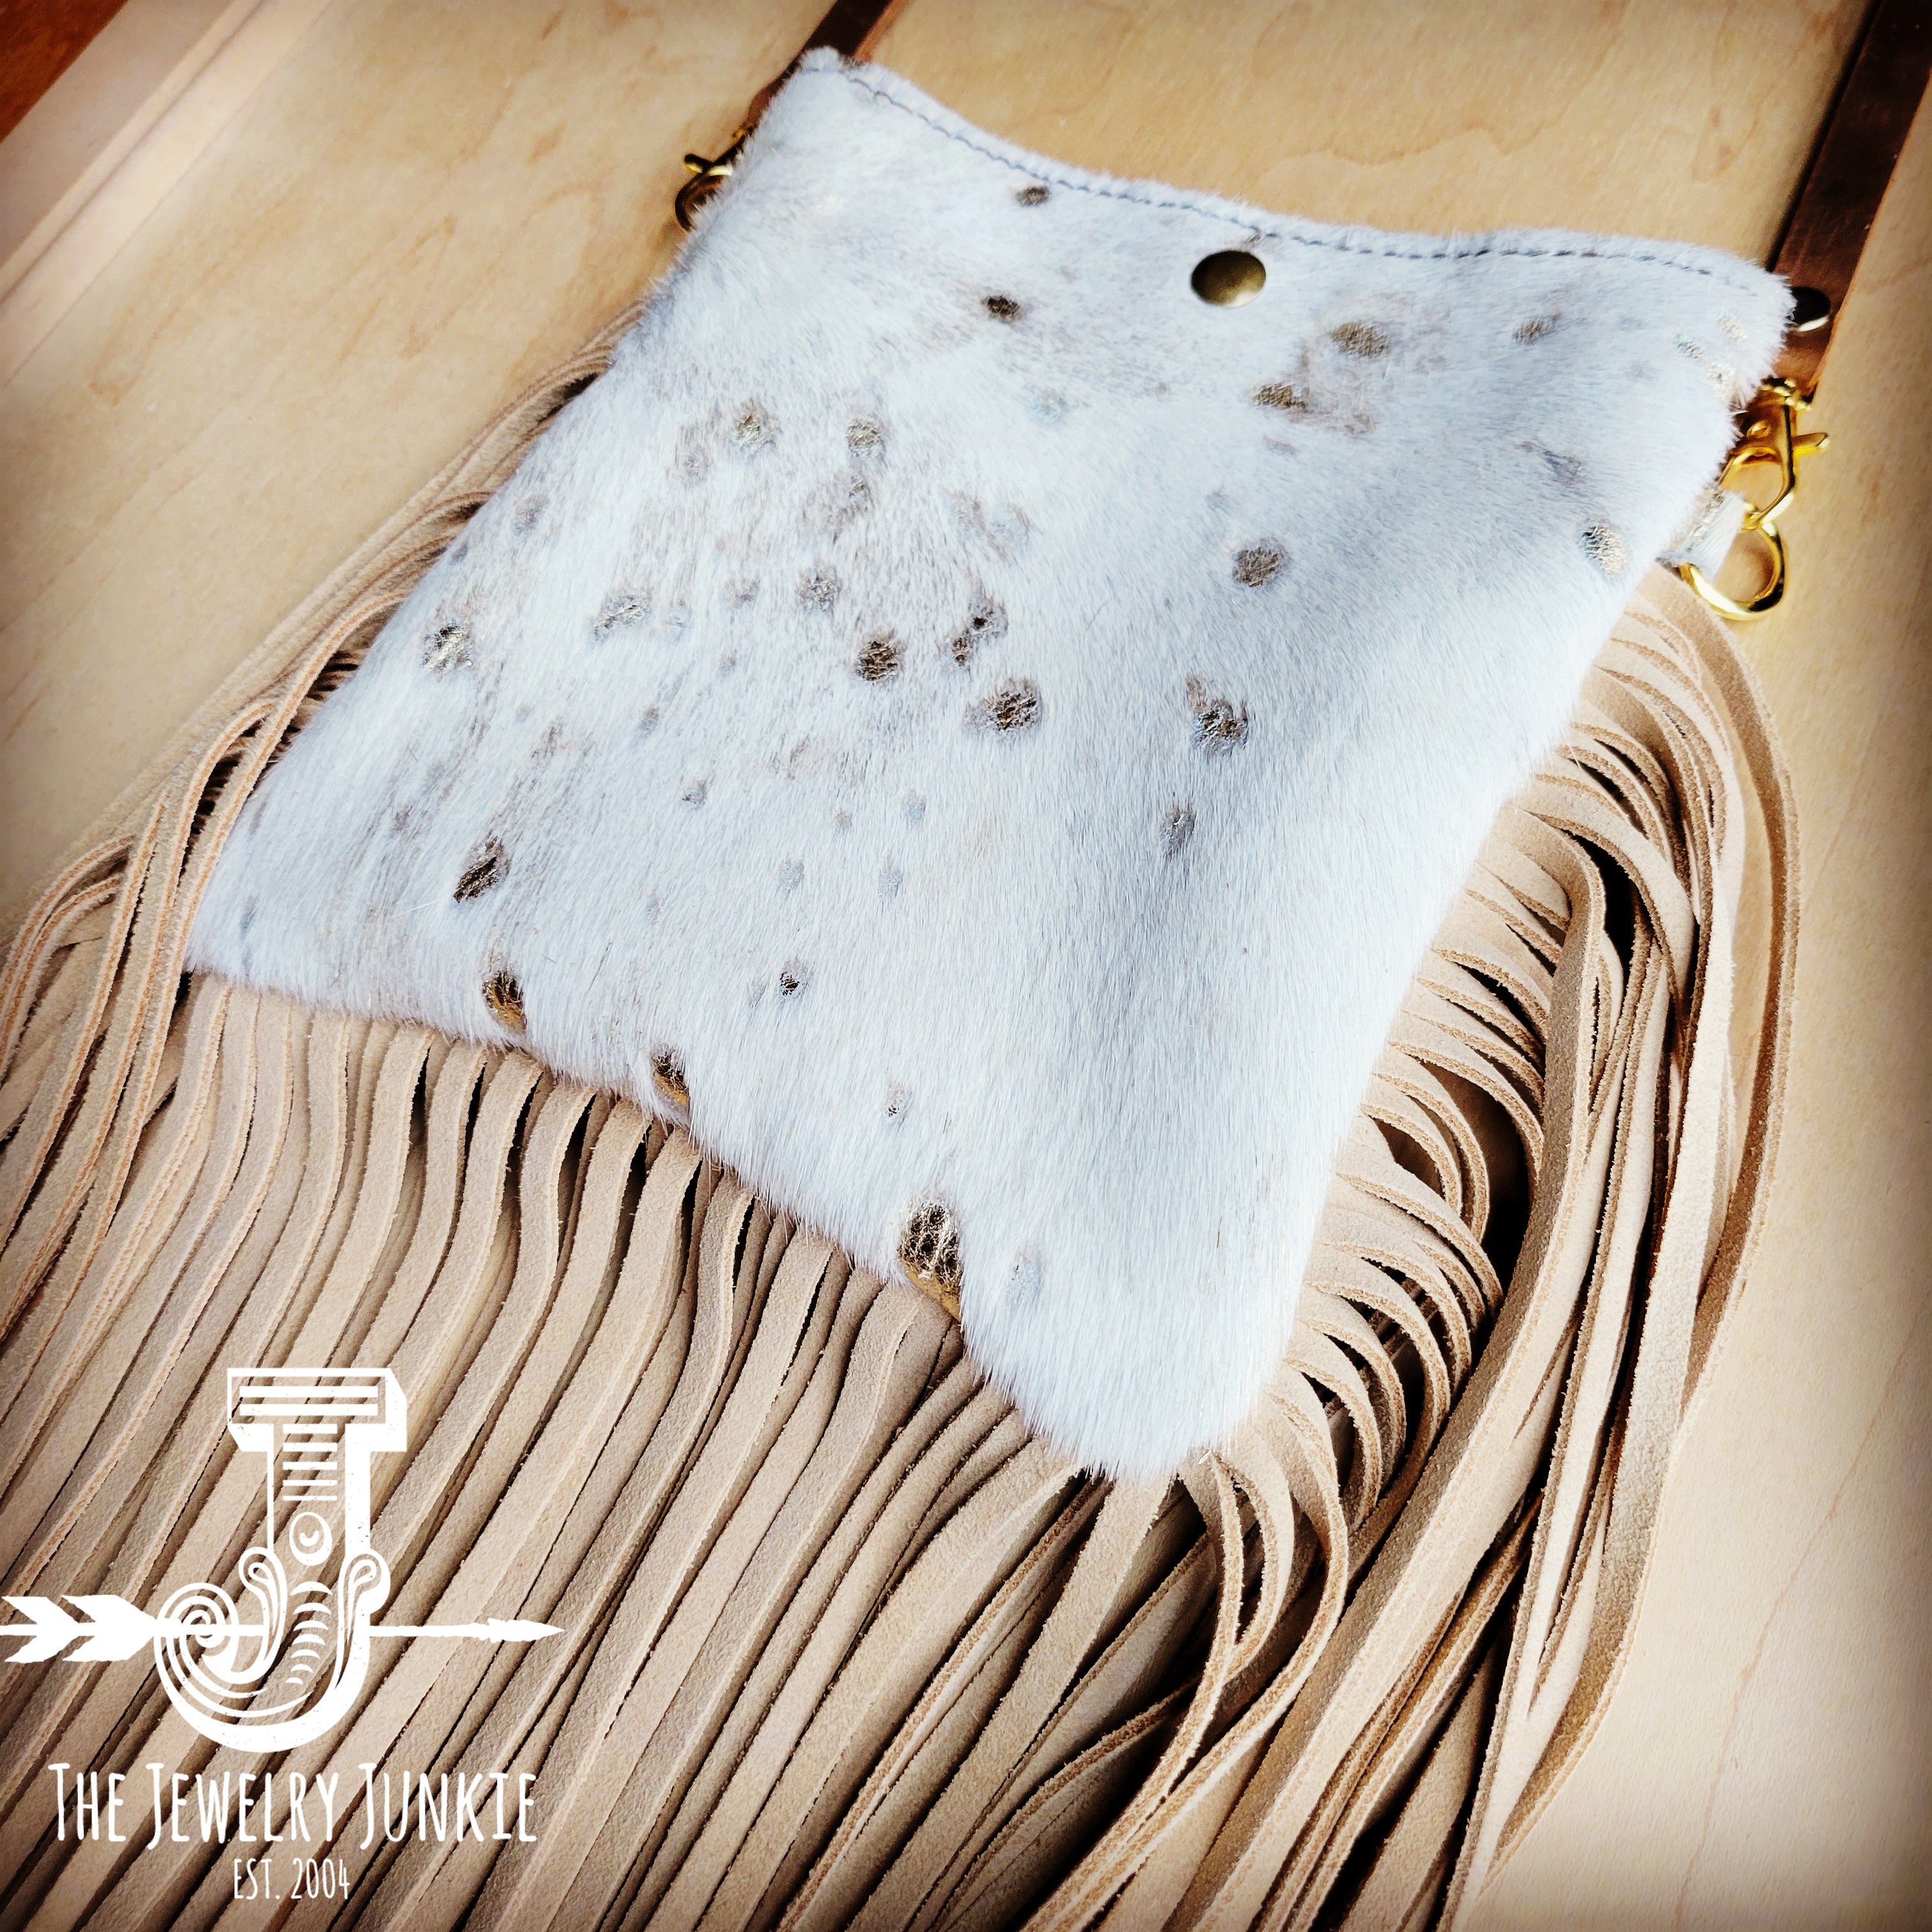 Boho Fringe Bags Projects Collection